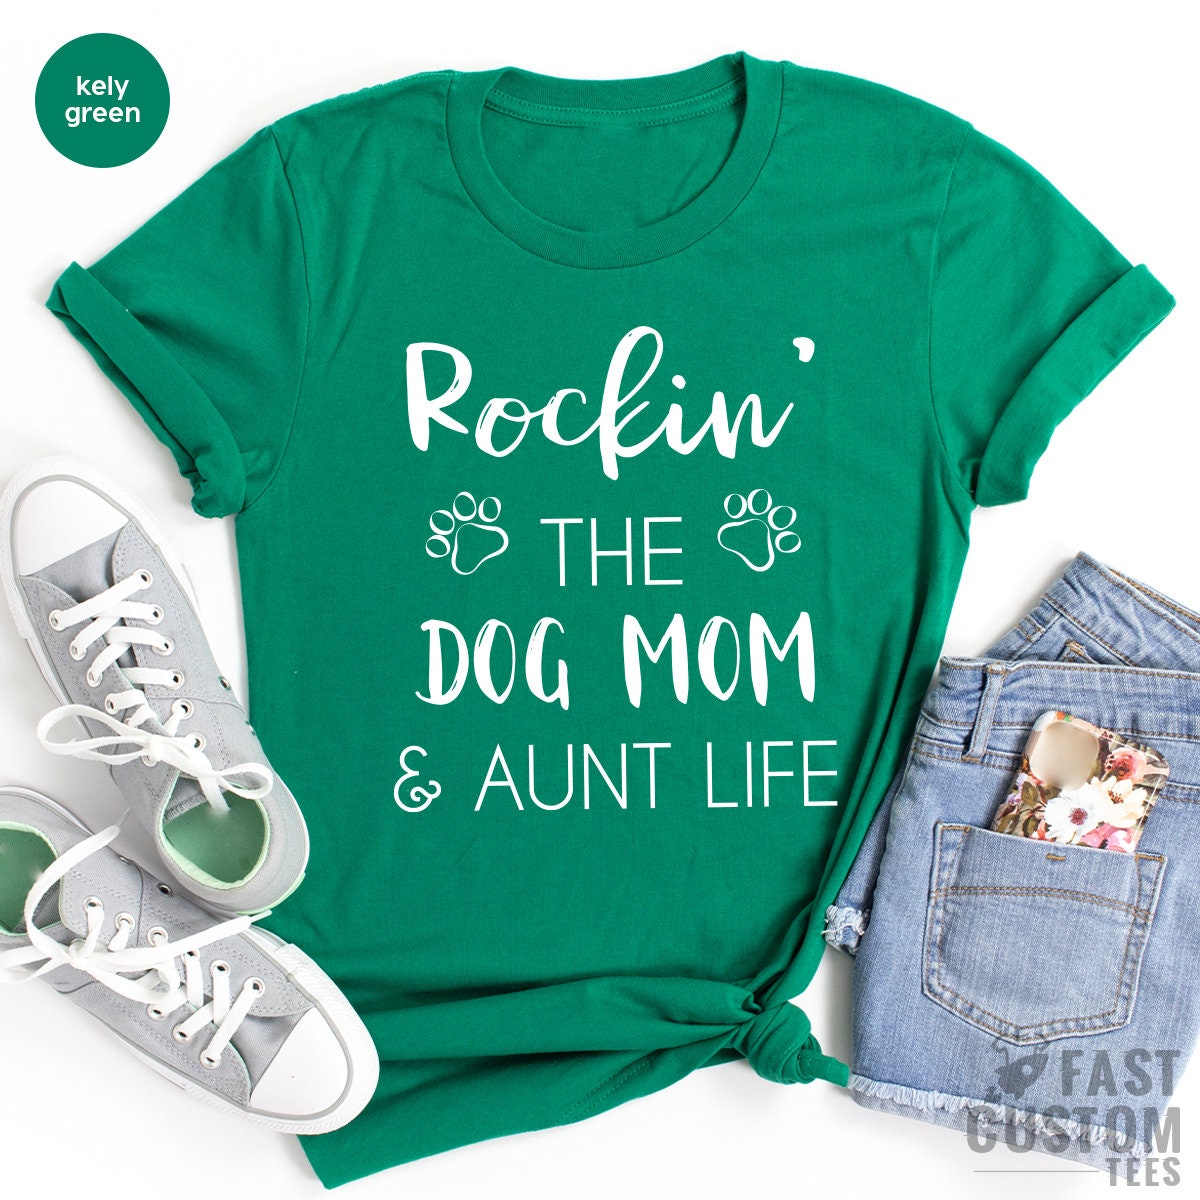 Dog Mom Shirt, Aunt Dog Mama Tee, Gift For Sister, Dog Mom Auntie Shirt, Dog Mom And Aunt Life, Dog Lover Aunt Tee, Best Aunt Gift - Fastdeliverytees.com